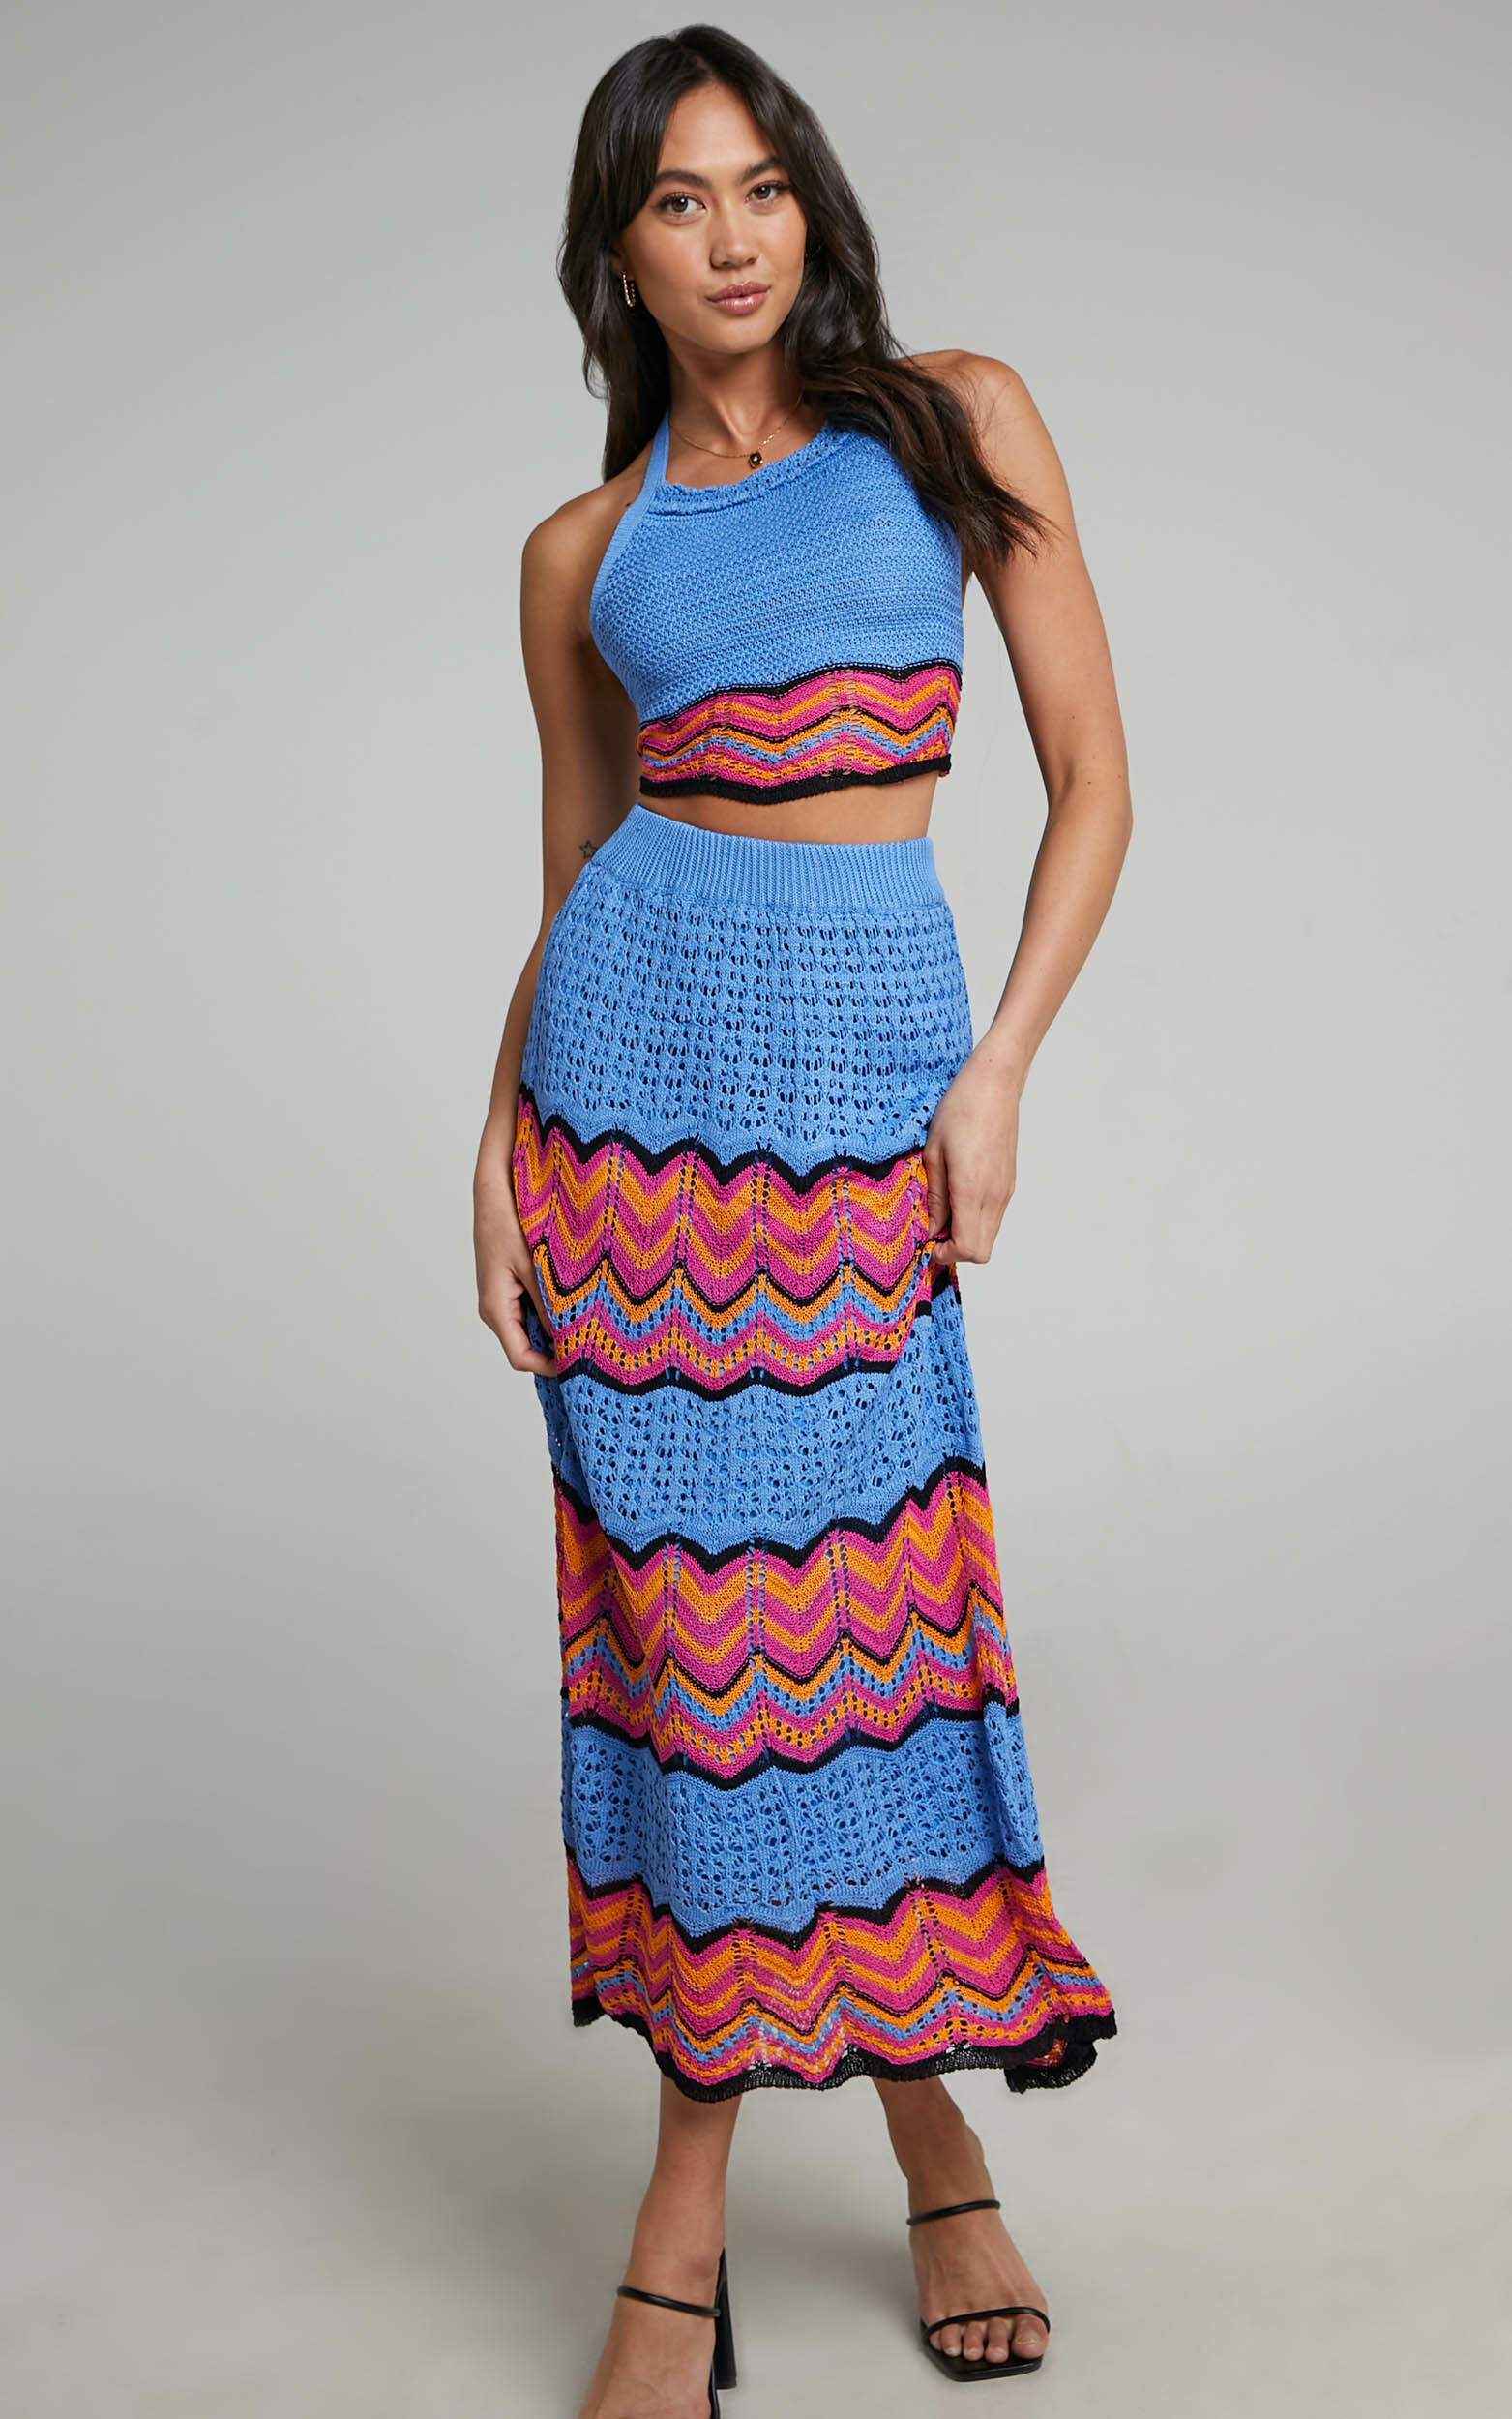 Thommy Crochet Skirt in Royal Blue - S, BLU1, hi-res image number null